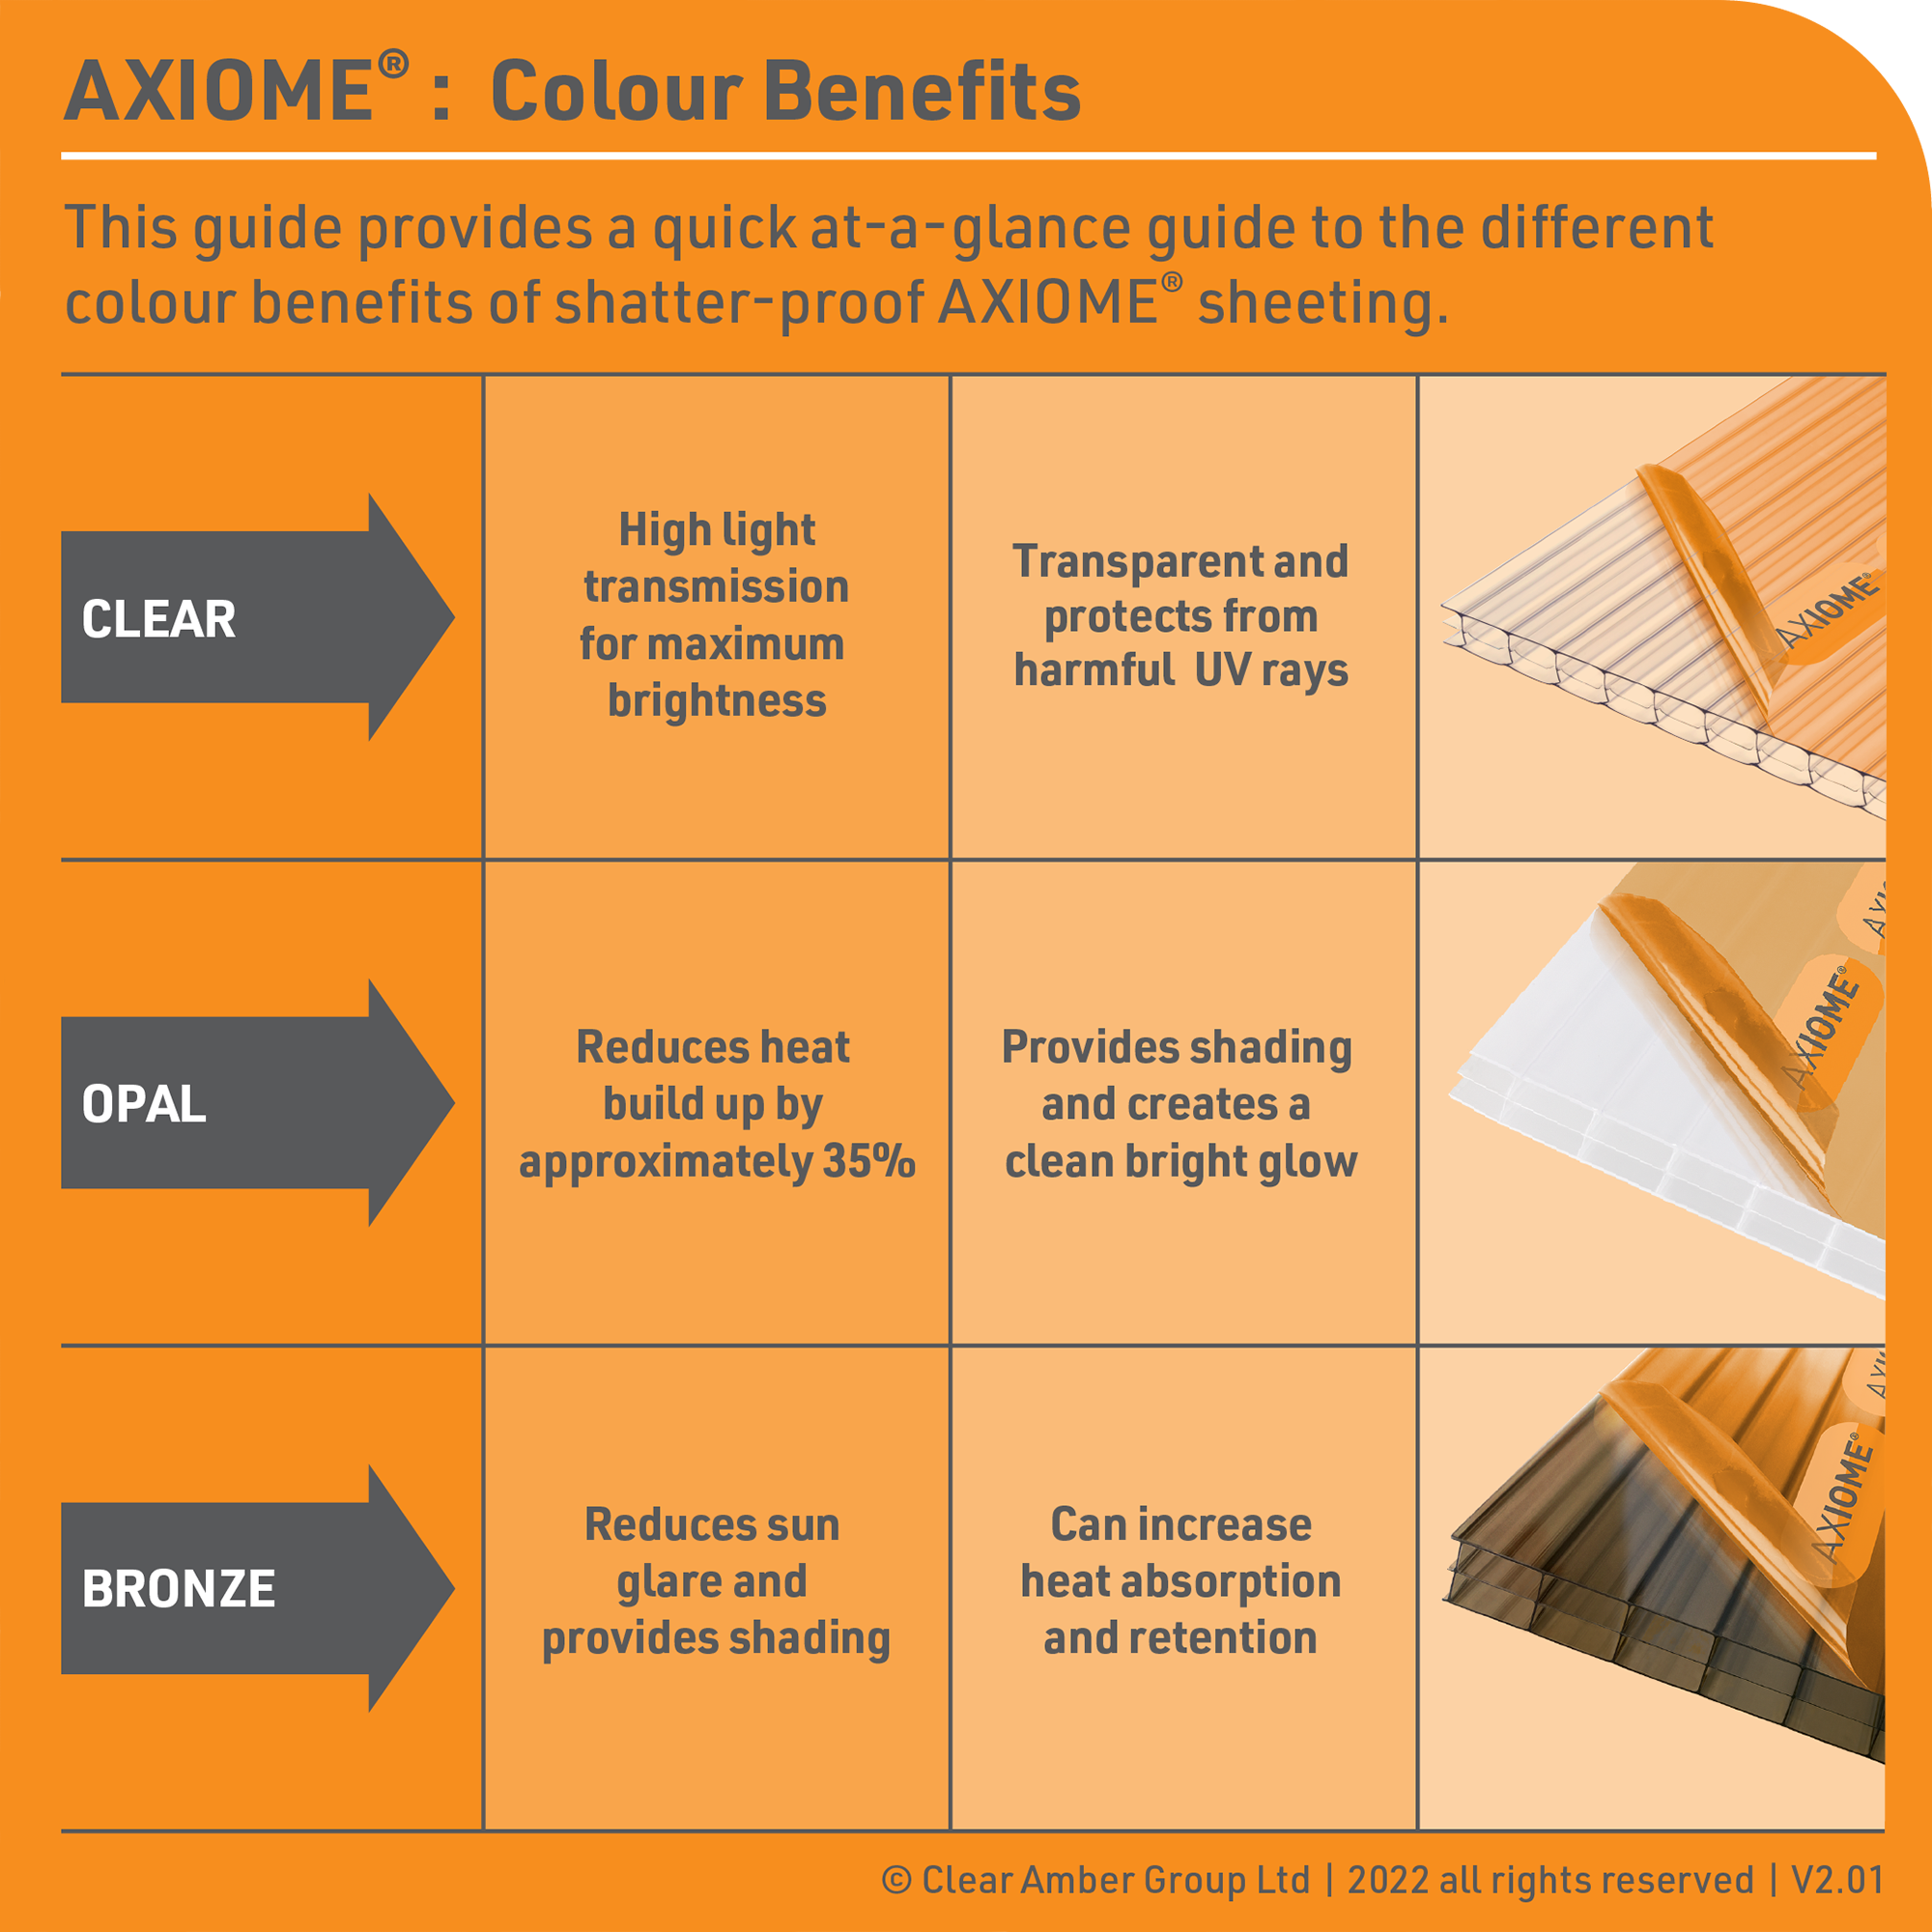 Axiome Multiwall Polycarbonate Roofing Sheet Colour Benefits Guide